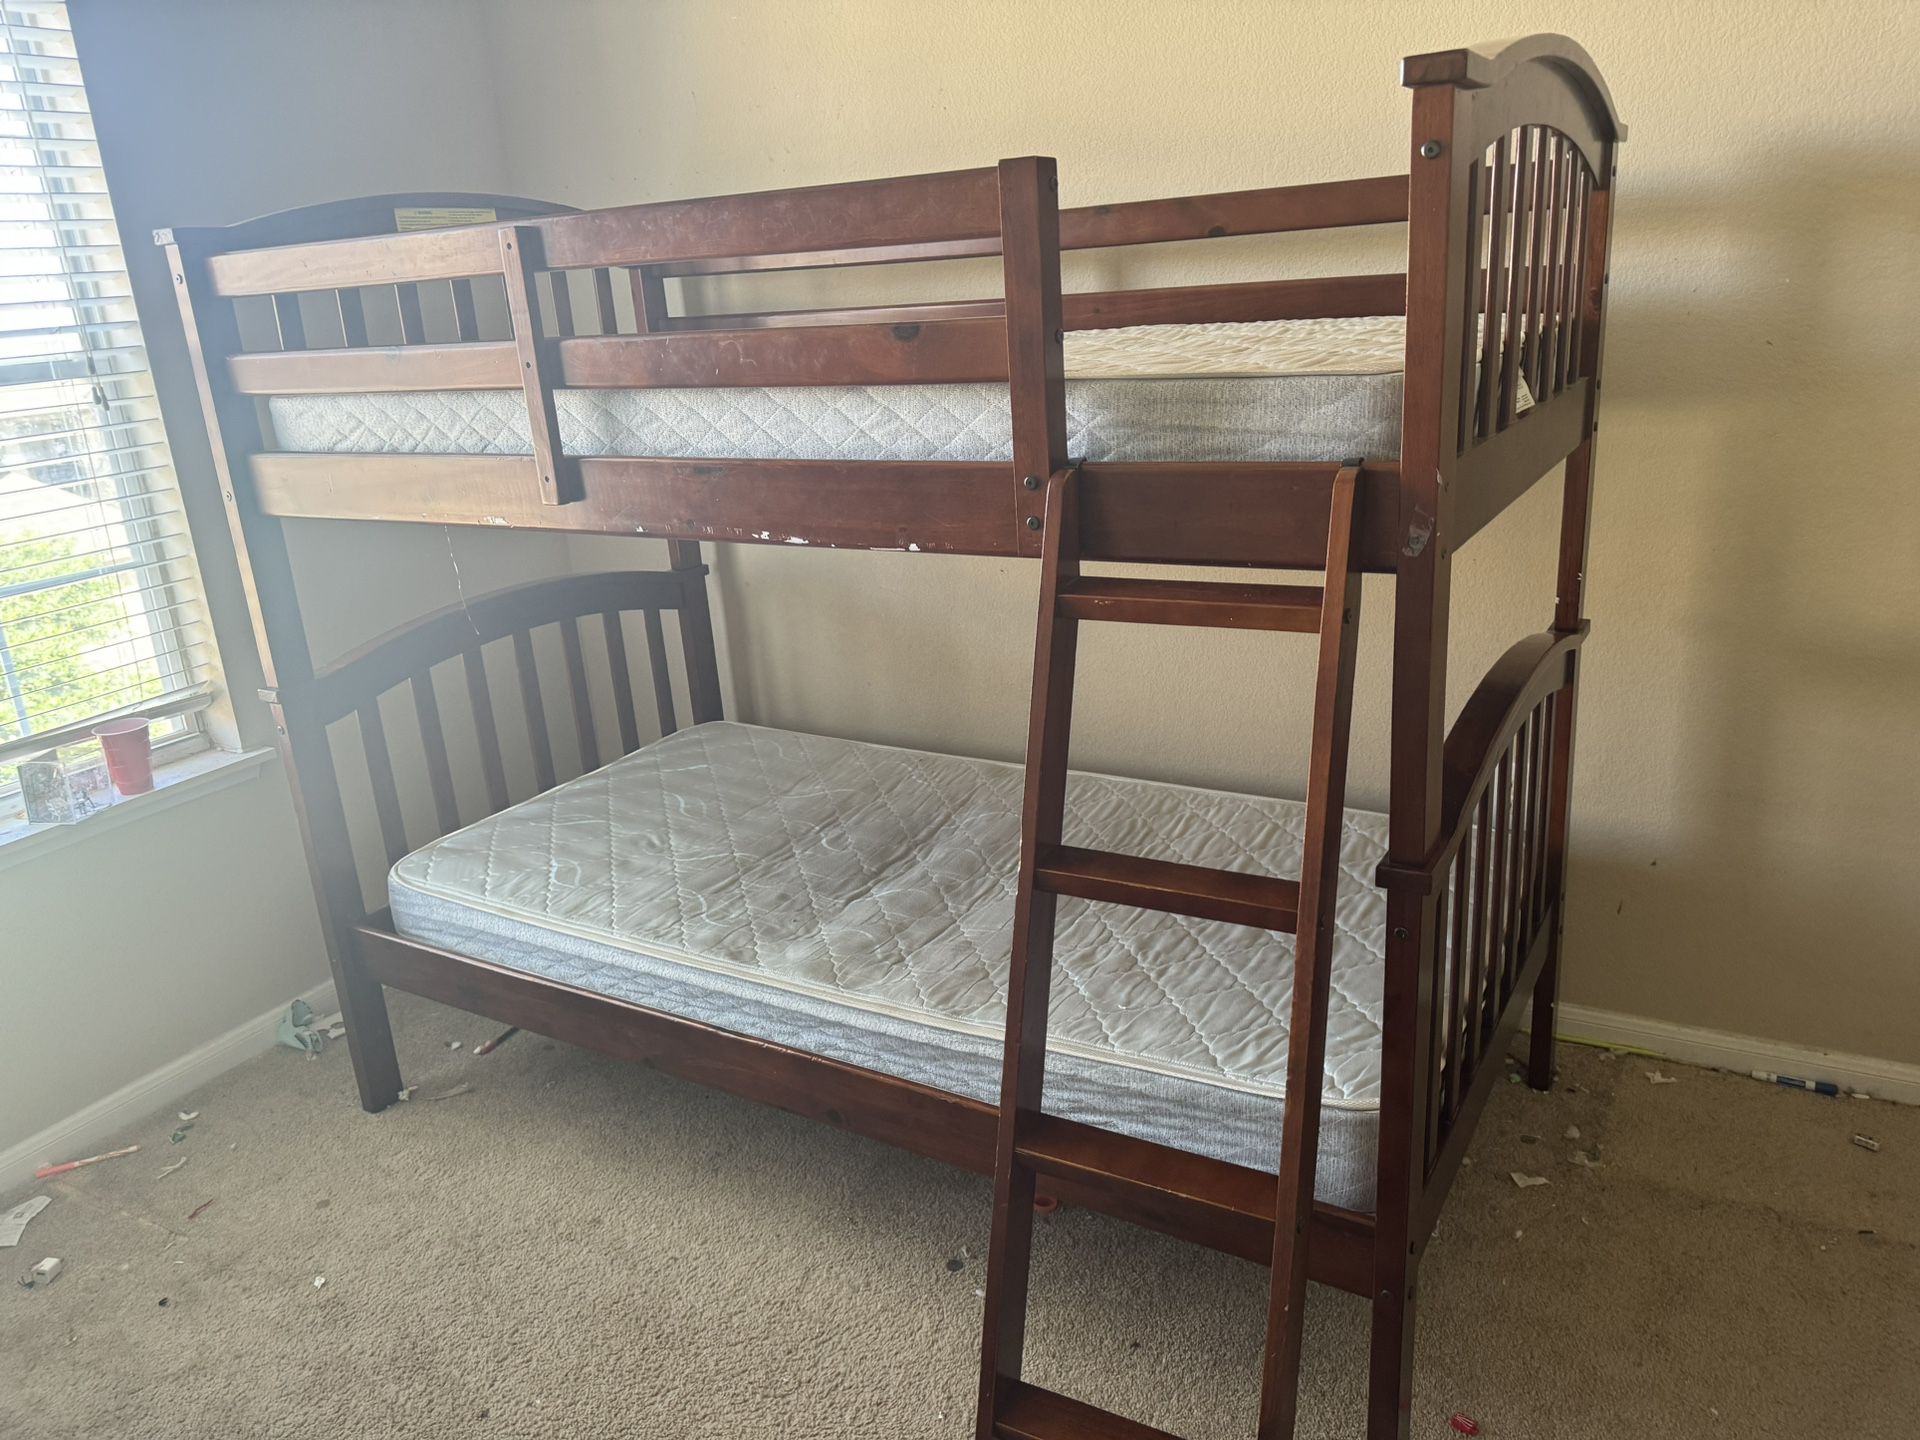 Twin Beds With Mattress